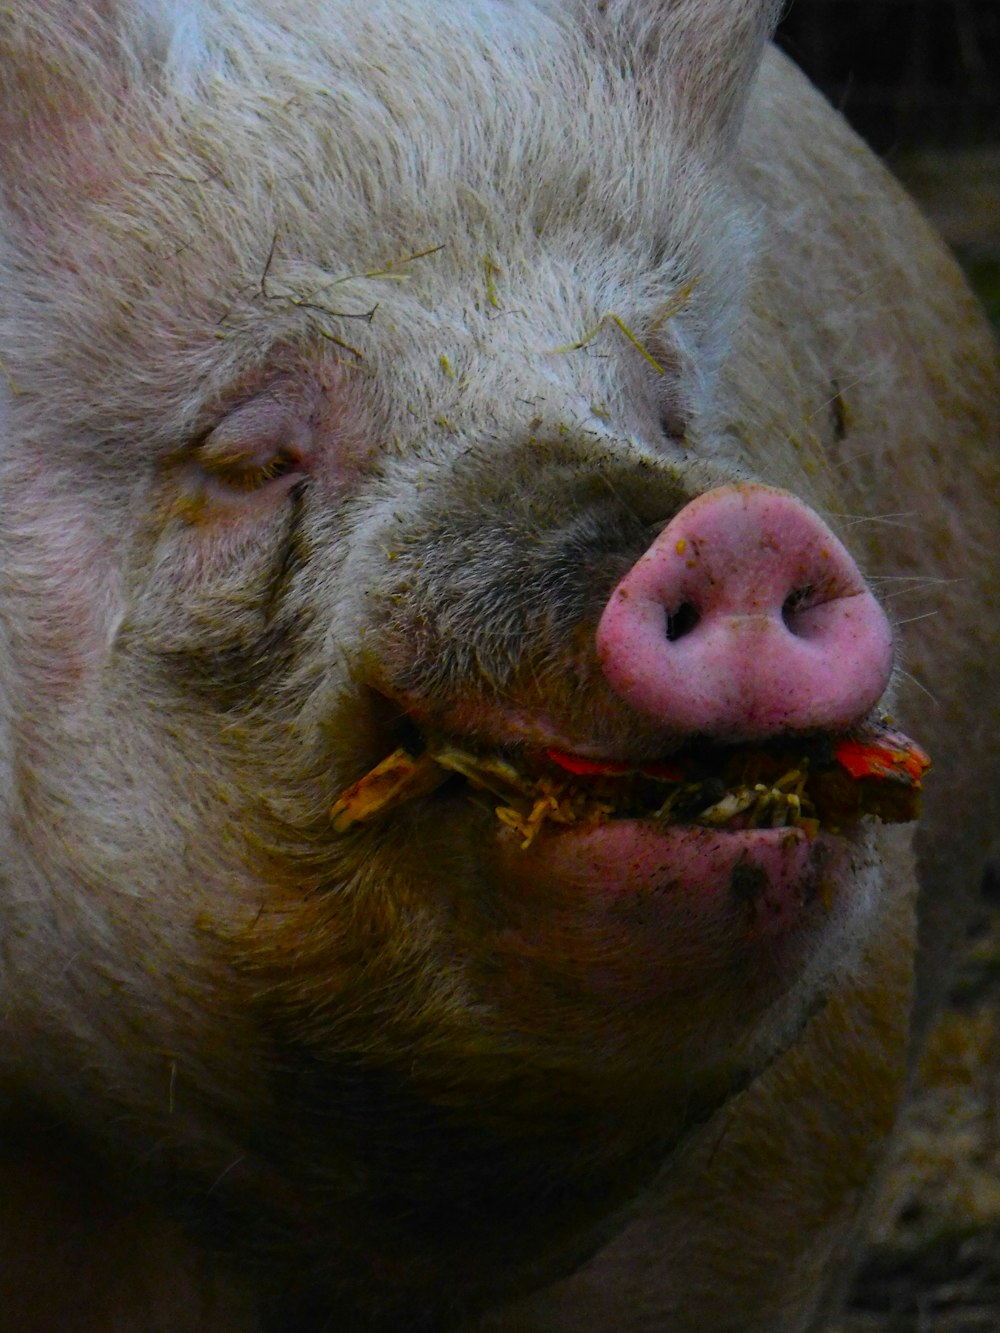 a pig with a piece of food in its mouth